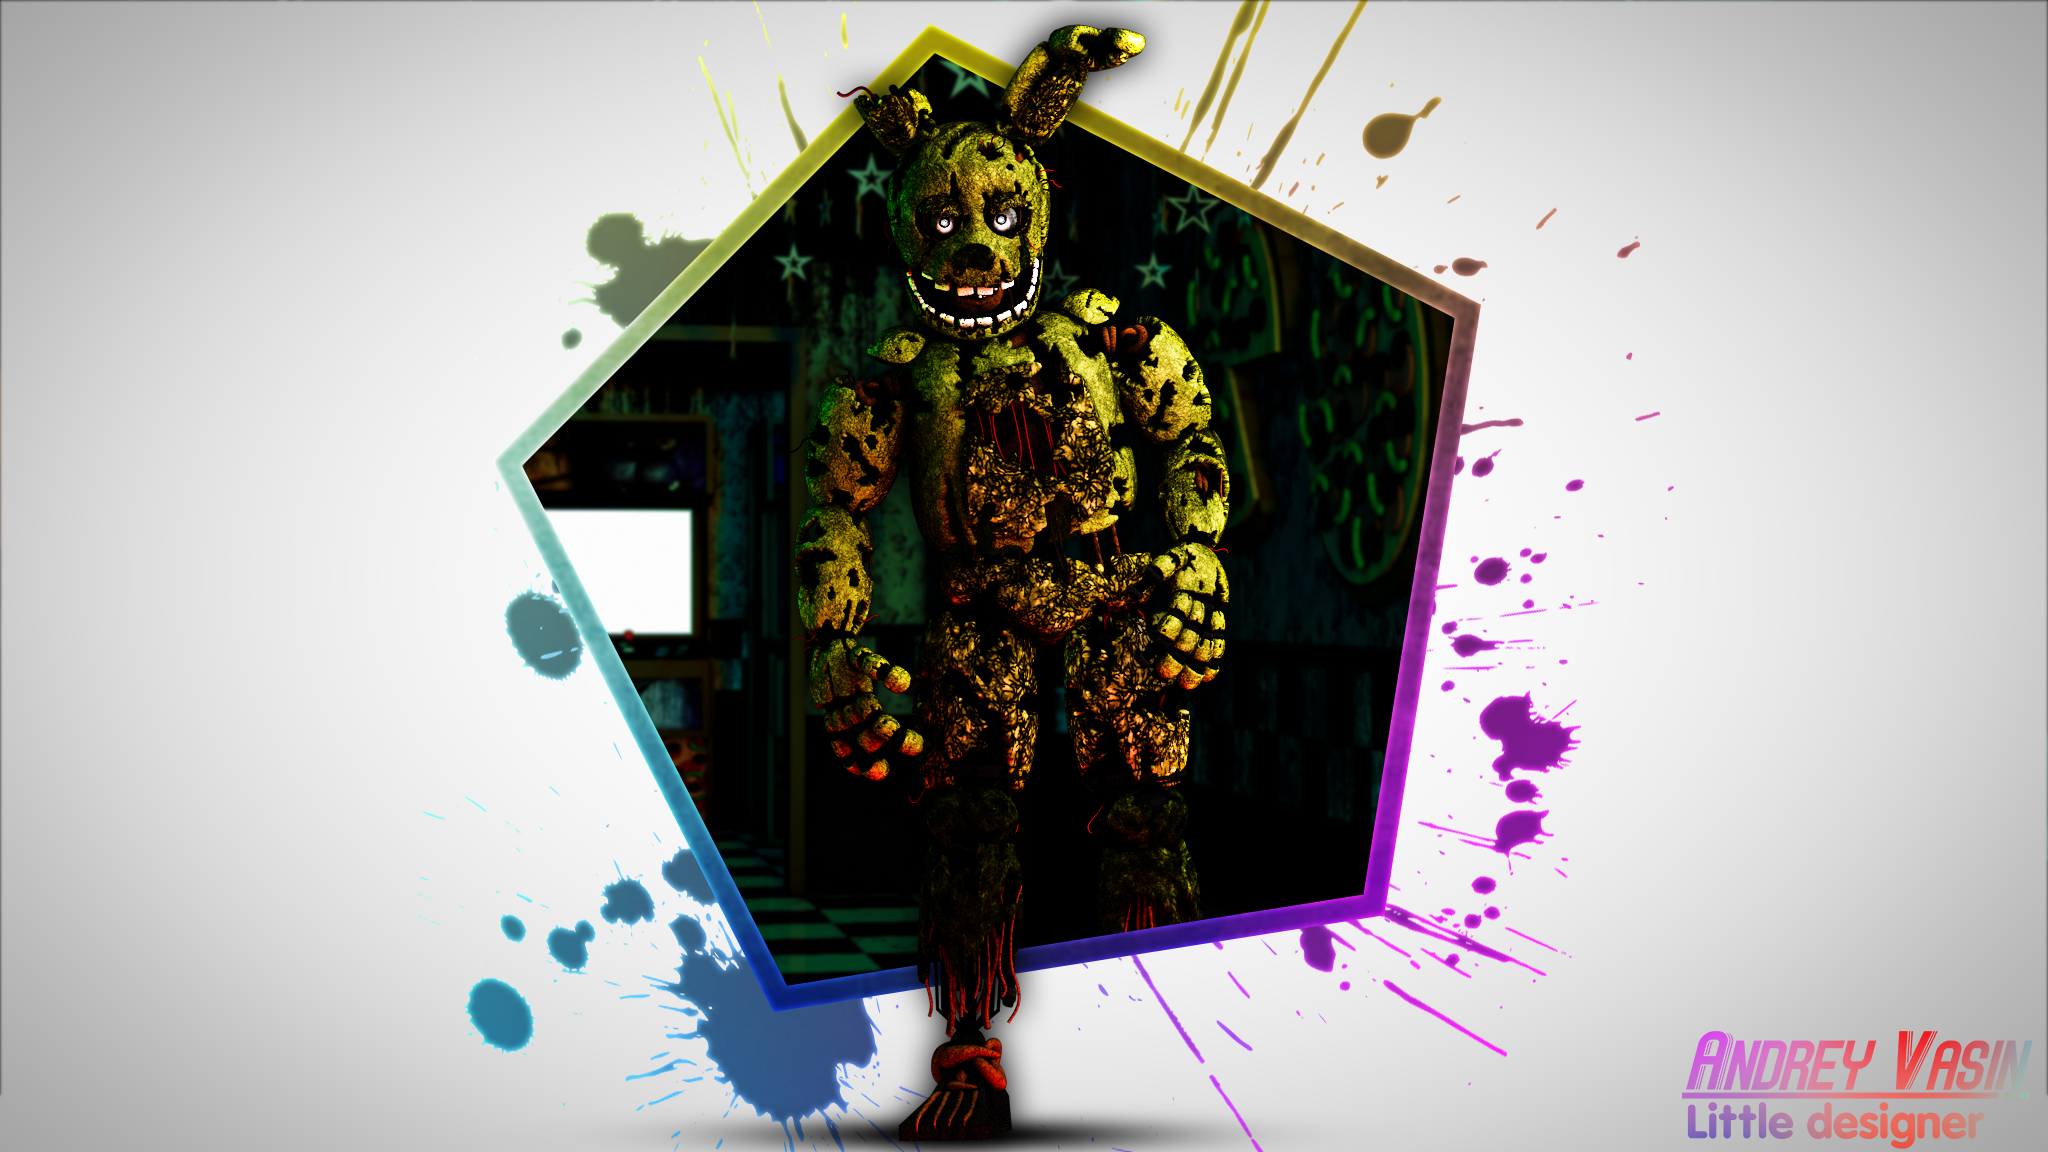 Wallpaper with springtrap. In 2K